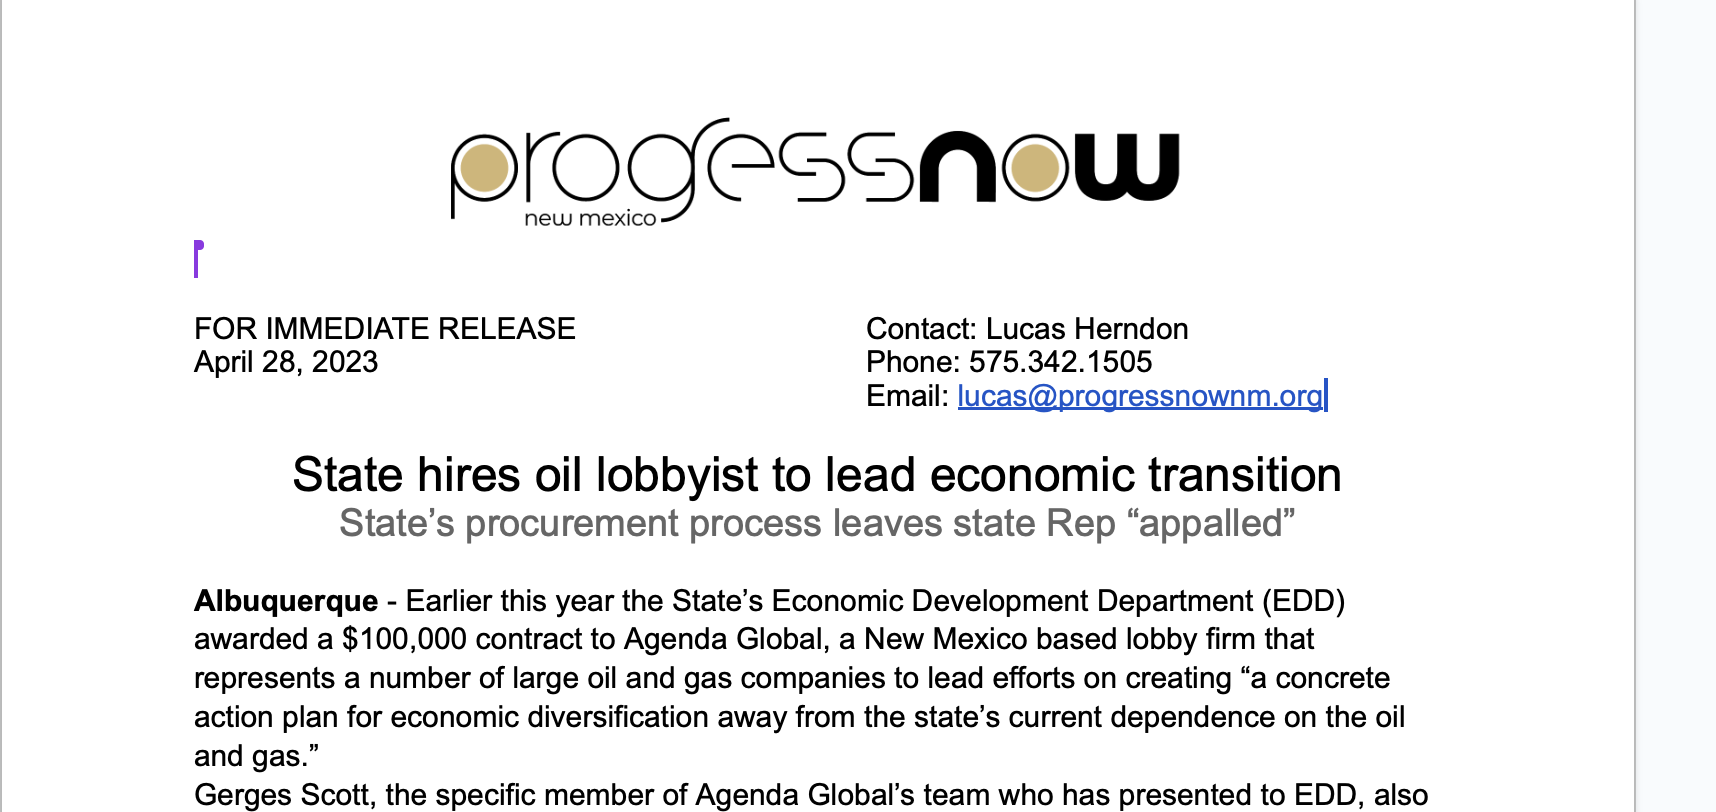 Press Release: State hires oil lobbyist to lead economic transition